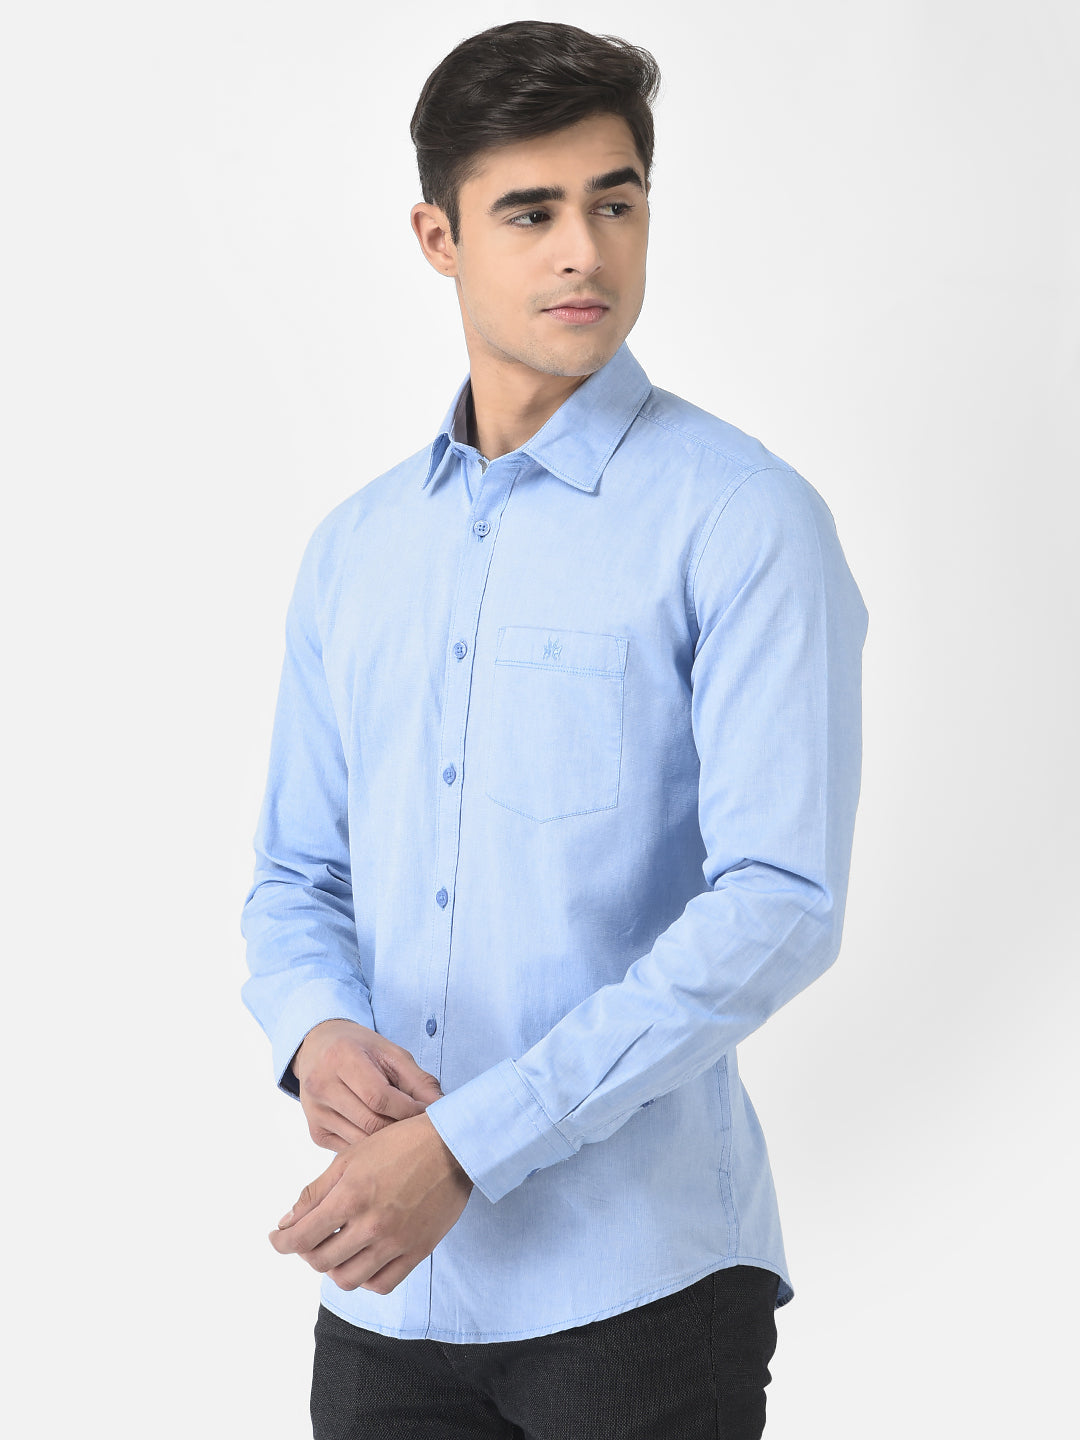  Sky Blue Shirt in Pure Cotton